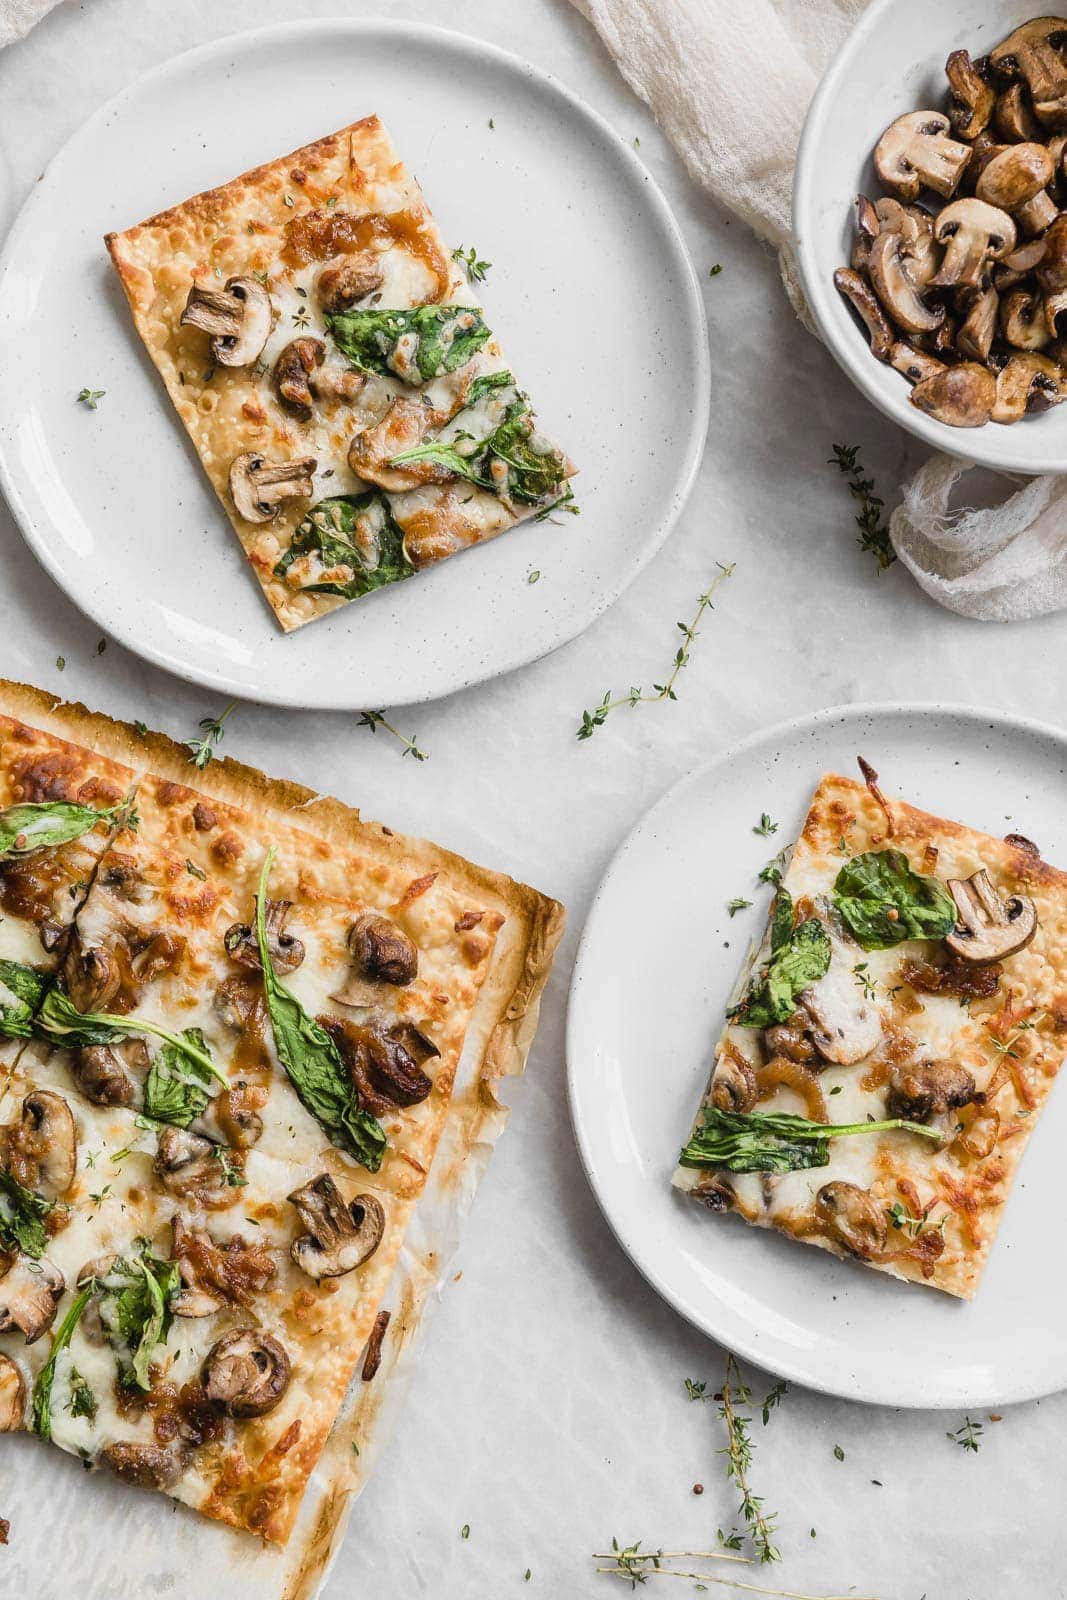 Caramelized Onion, Mushroom, and Spinach Pizza